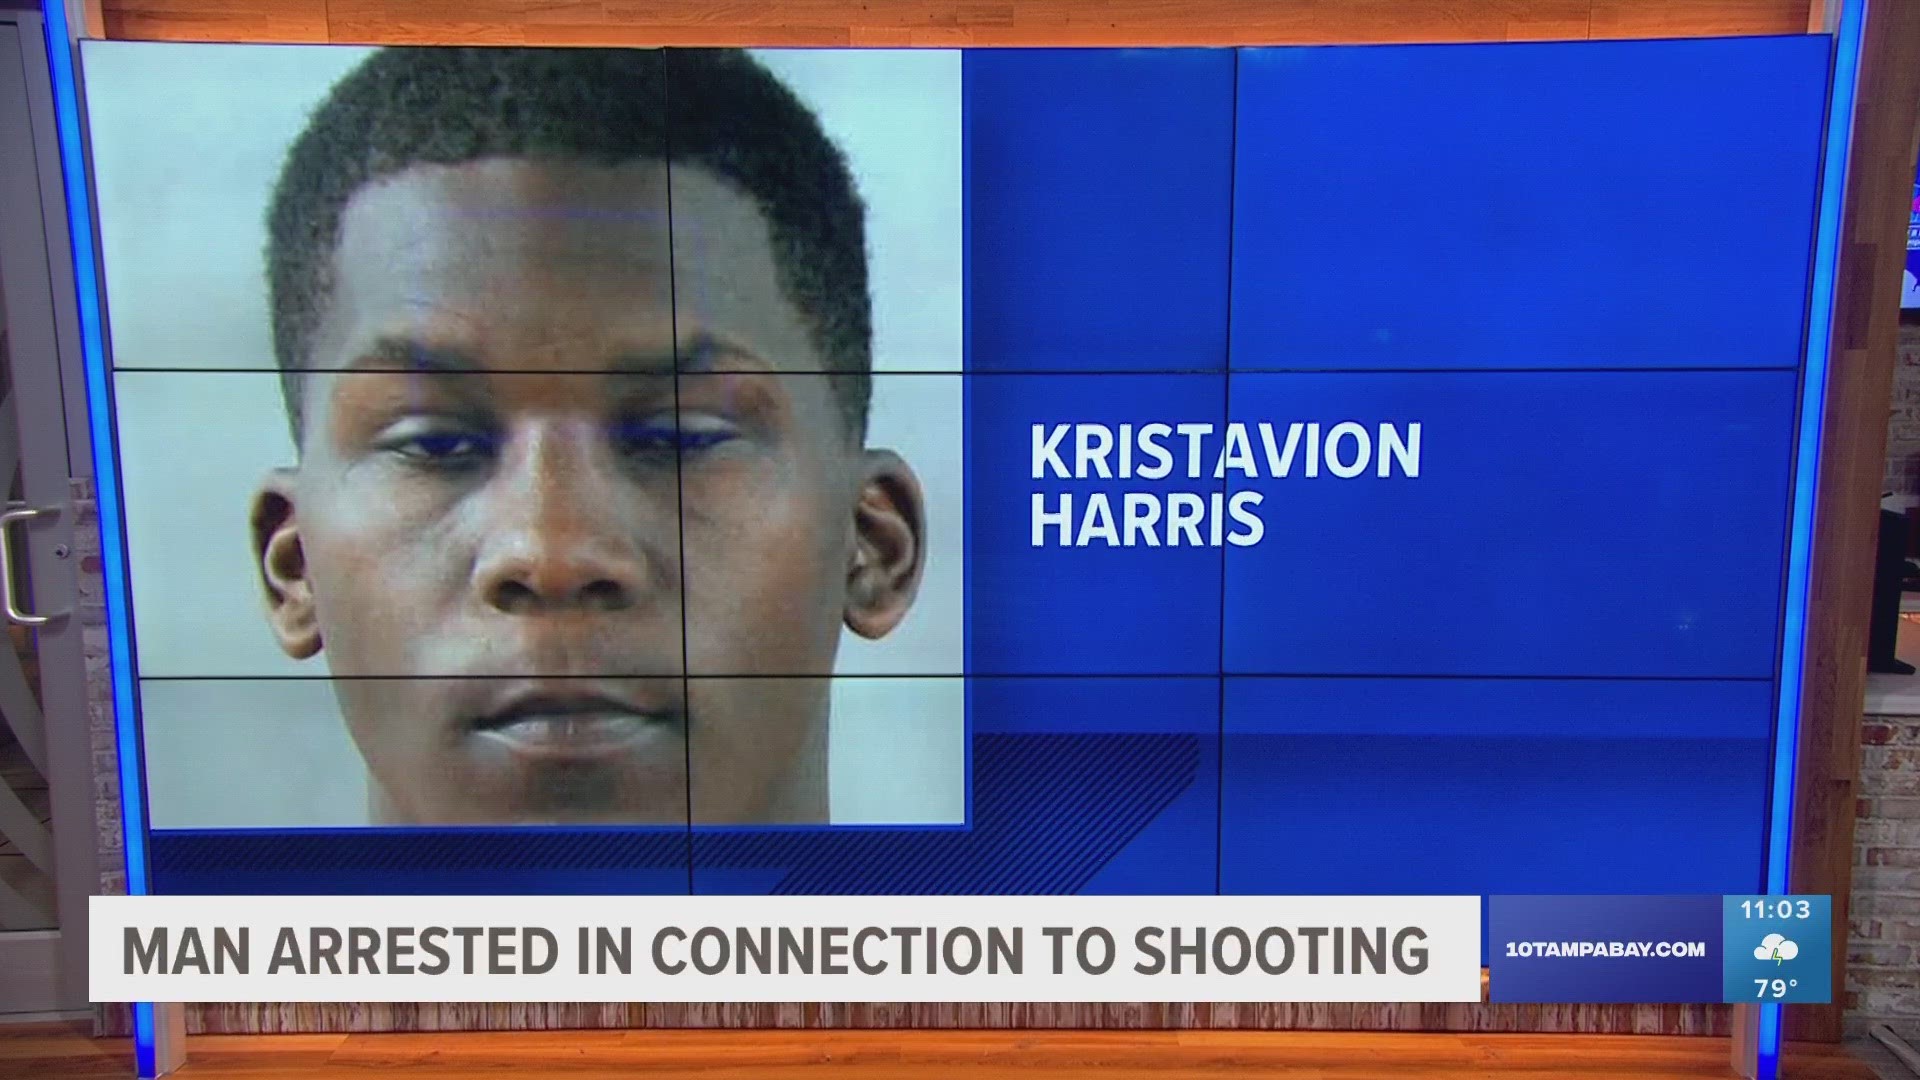 Kristavion Harris, 22, was charged with second-degree murder and aggravated battery with a deadly weapon.